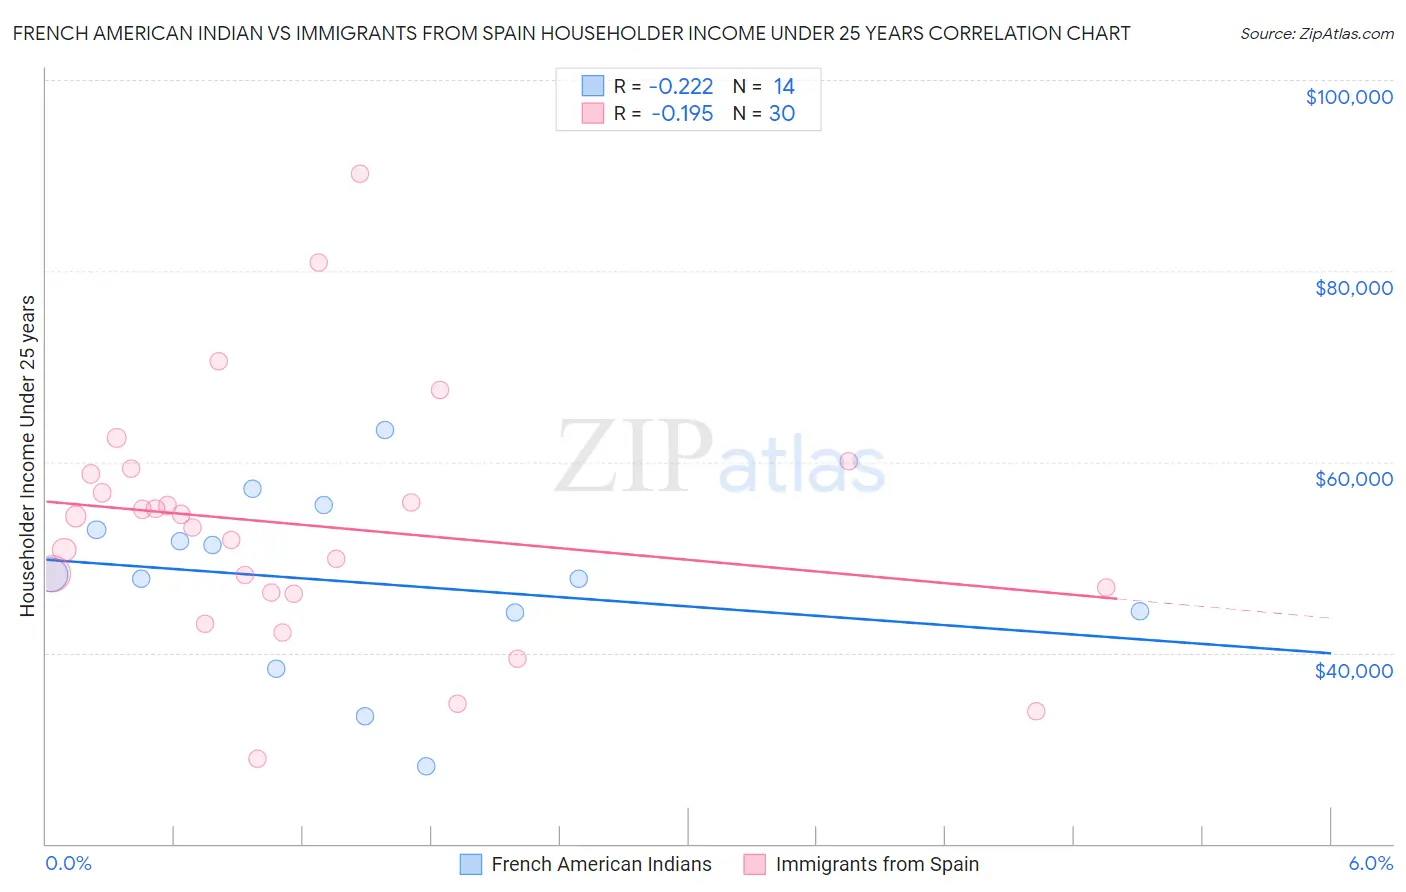 French American Indian vs Immigrants from Spain Householder Income Under 25 years